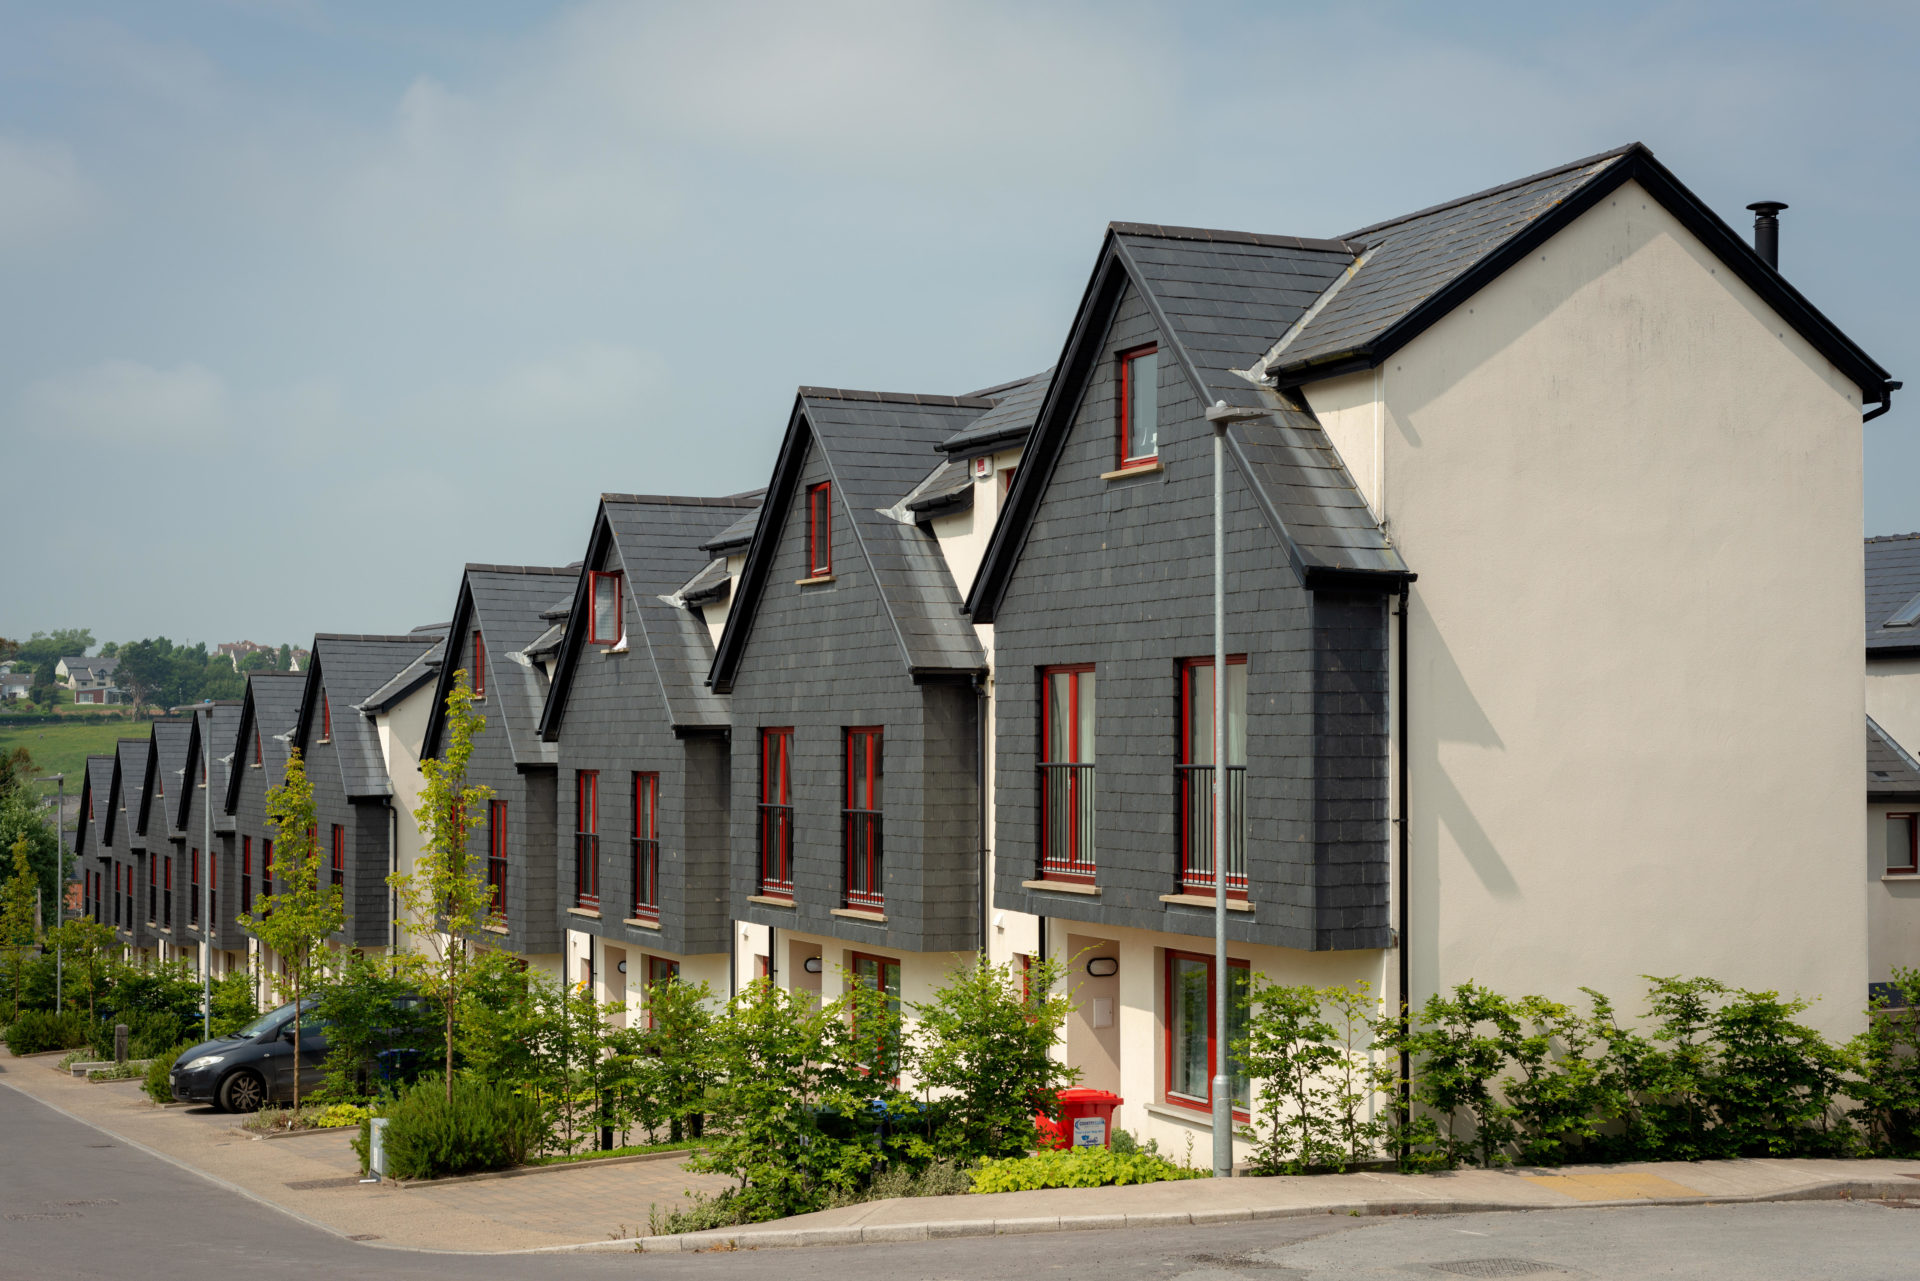 P83NHF Terraced houses are seen after construction in Kinsale, Co Cork